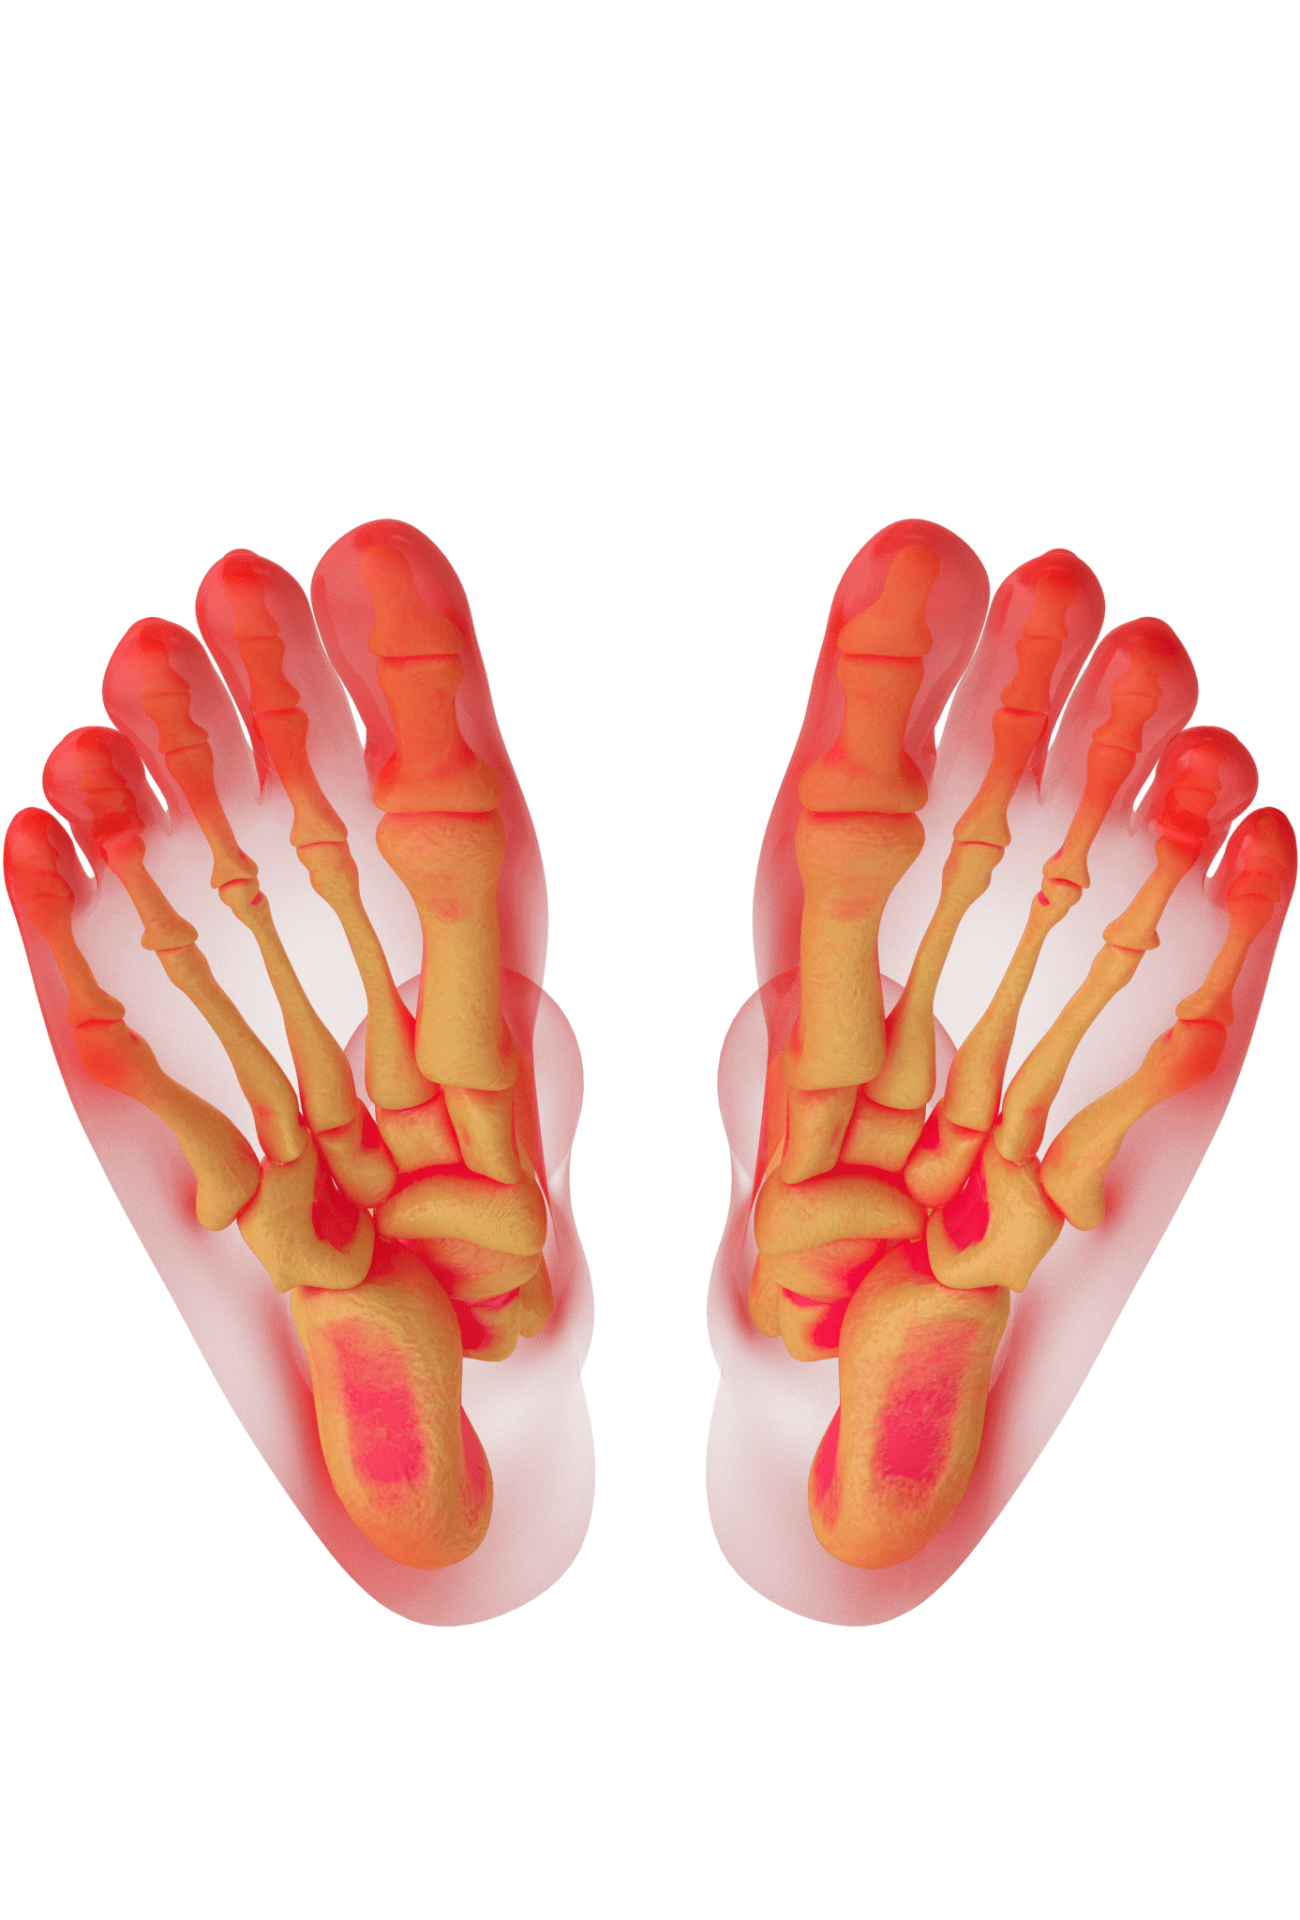 foot-anatomy-red_optimized.o01.2k